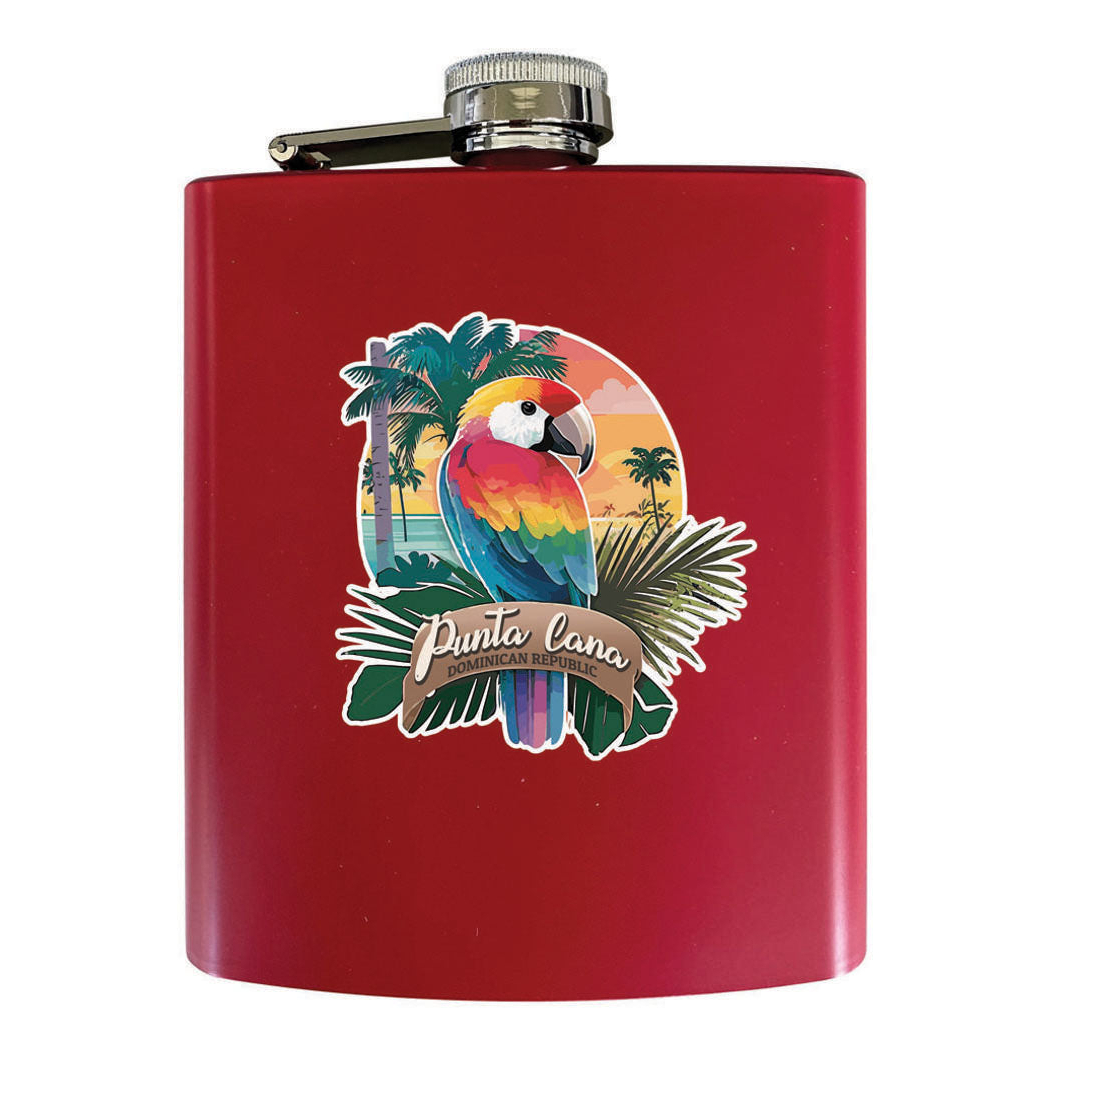 Punta Cana Dominican Republic Souvenir Matte Finish Stainless Steel 7 Oz Flask - Red, PARROT